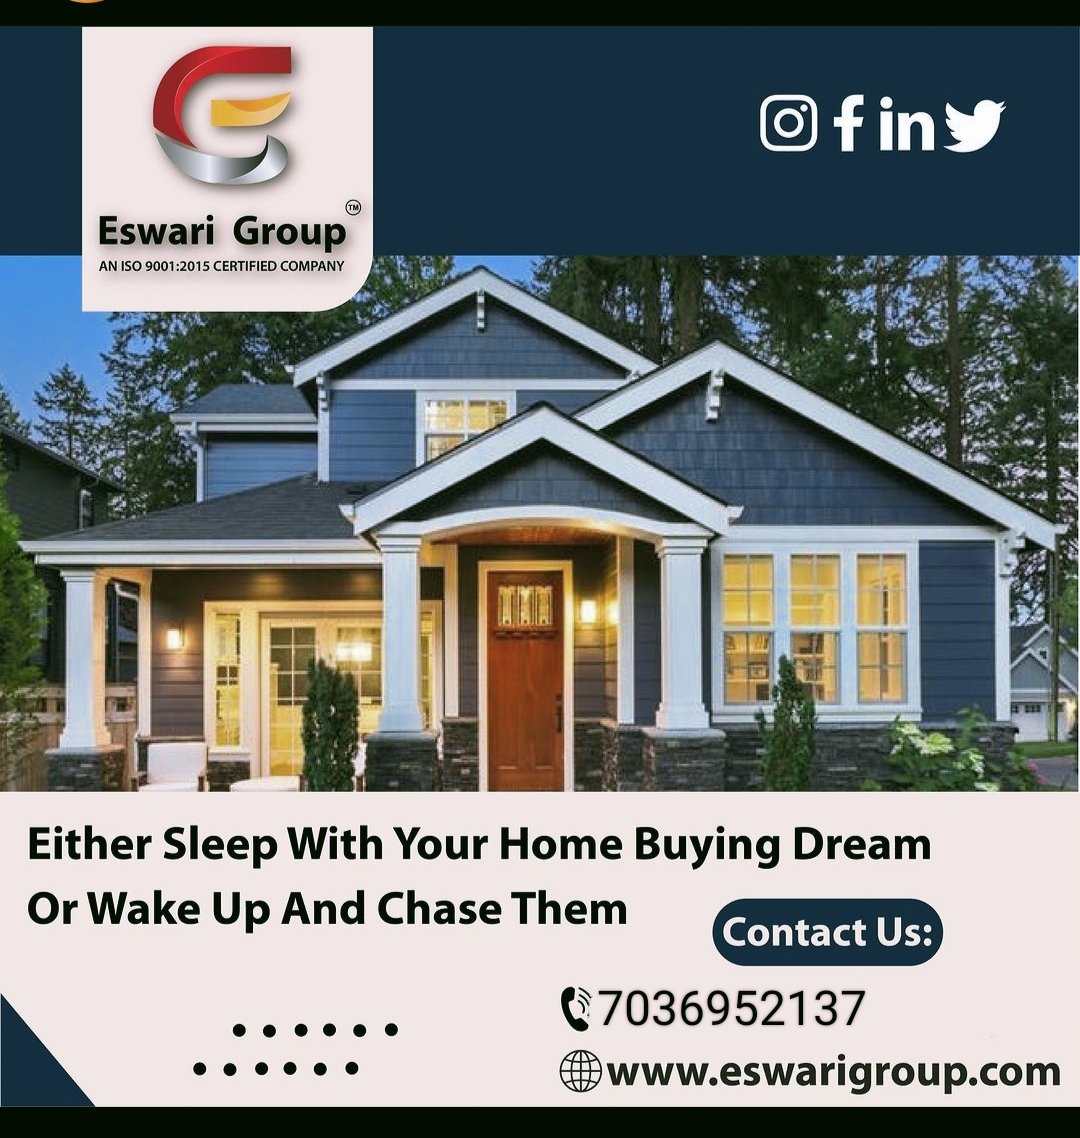 It's okay to expect a lot from your new home.#eswarigroup fulfills all our housing expectations.
#EswariHomes 
#eswariinteriors 
#eswariflats 
#visakhapatnamrealestate 
#teacher 
#govtjobs 
#bestcompany 
#visakhapatnam 
#lovewhereyoulive 
For inf cont:7036952137